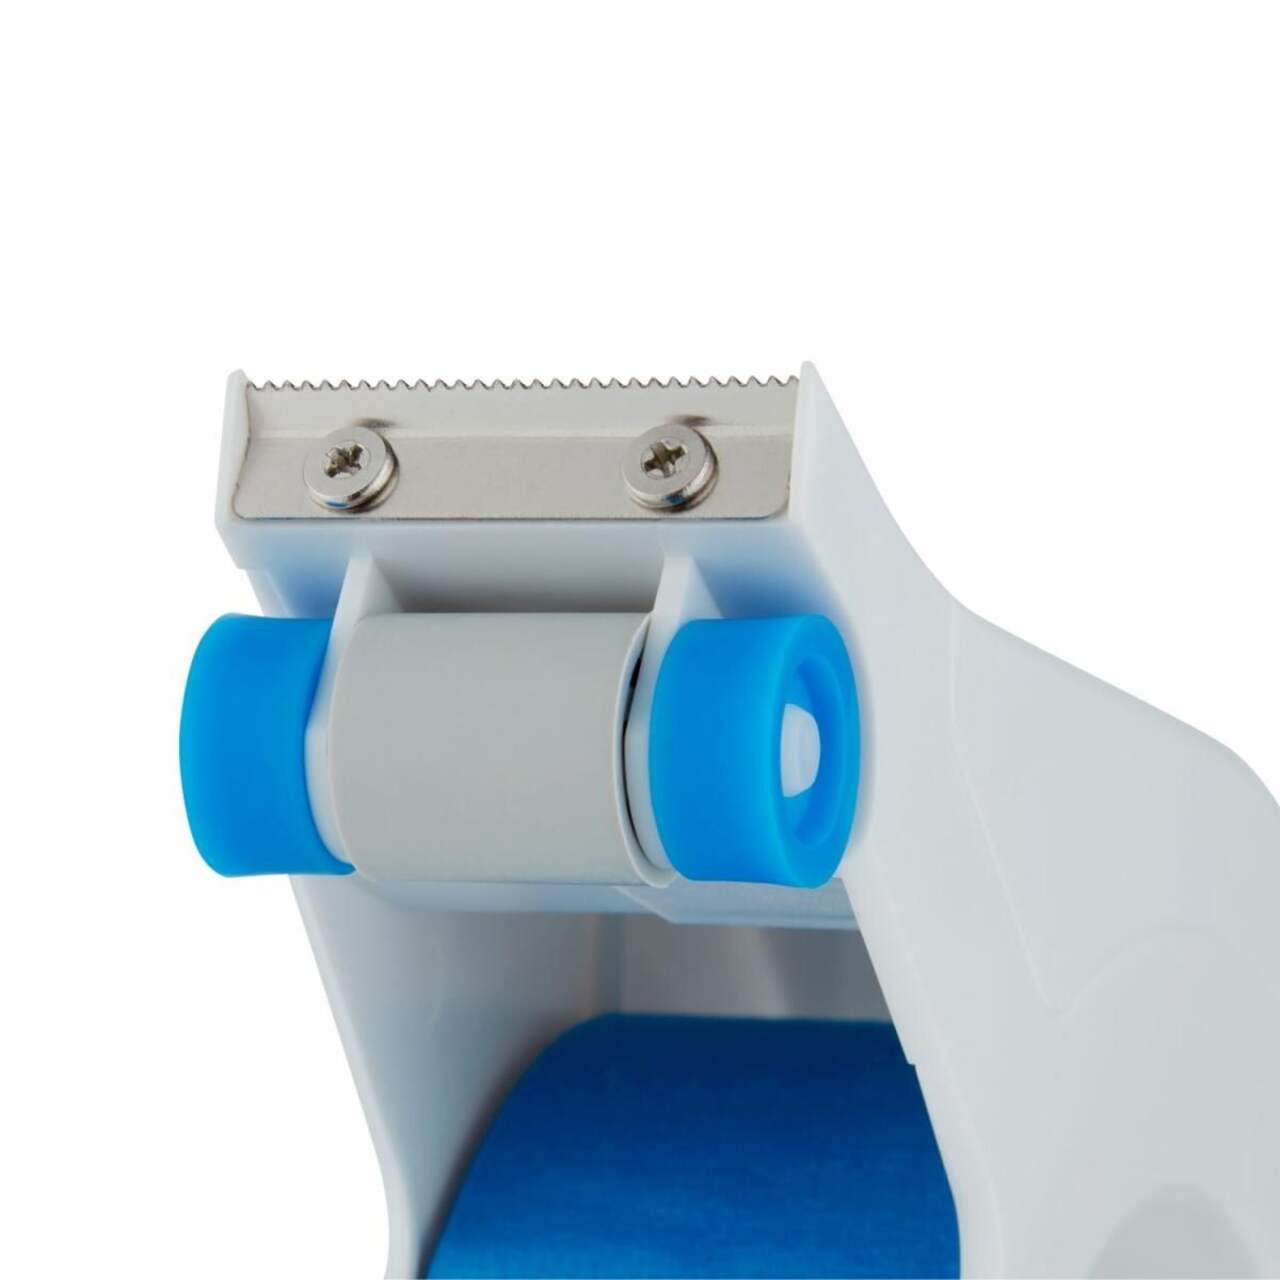 ScotchBlue Paper and Masking Tape Dispenser in the Tape Dispensers